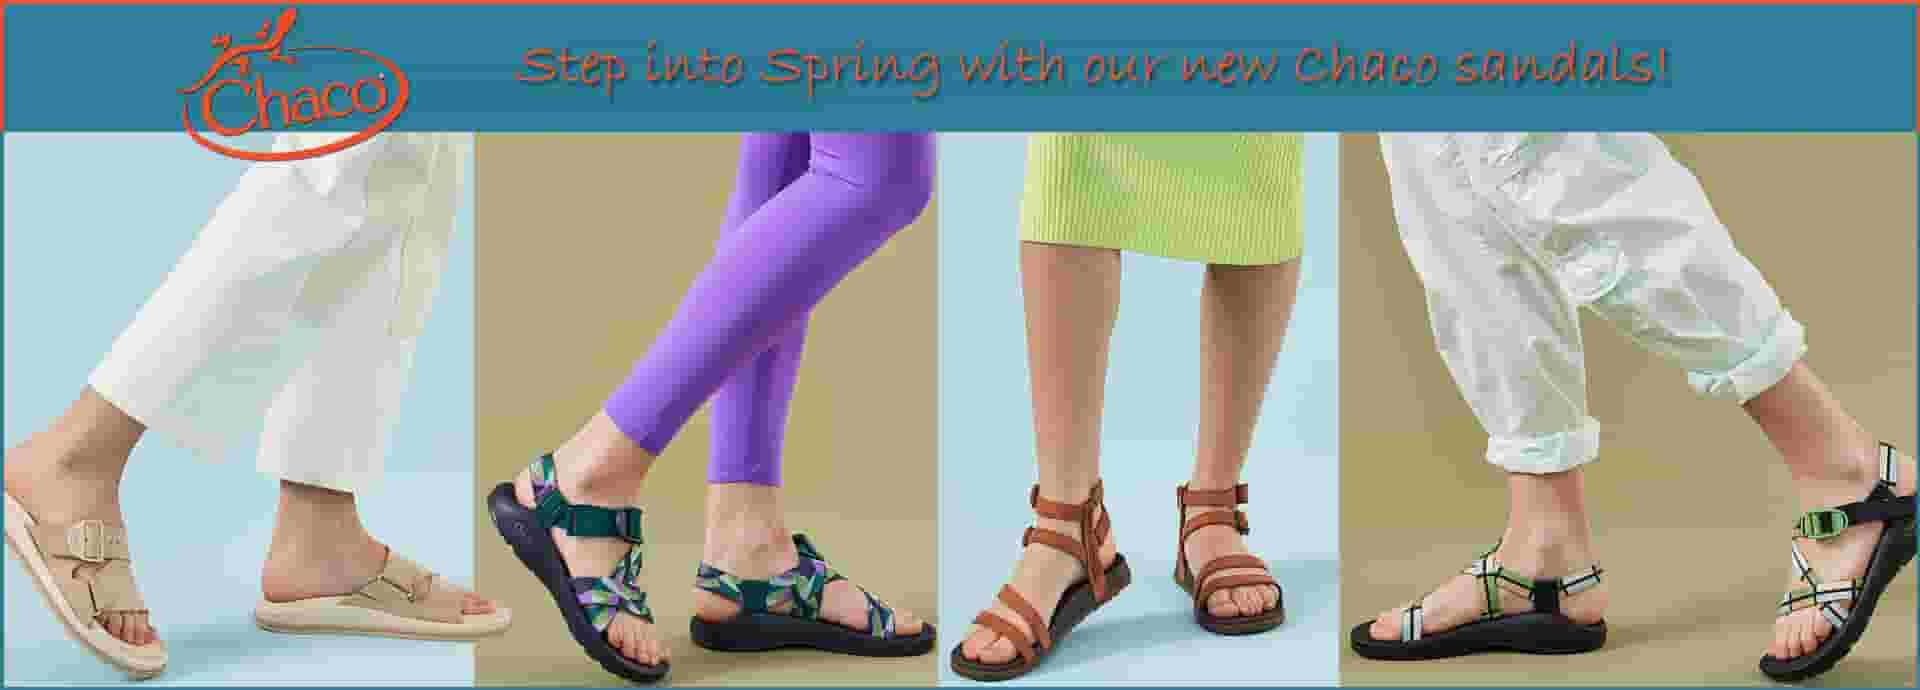 Step into Spring with our new Chaco sandals at ElliottsBoots.com.